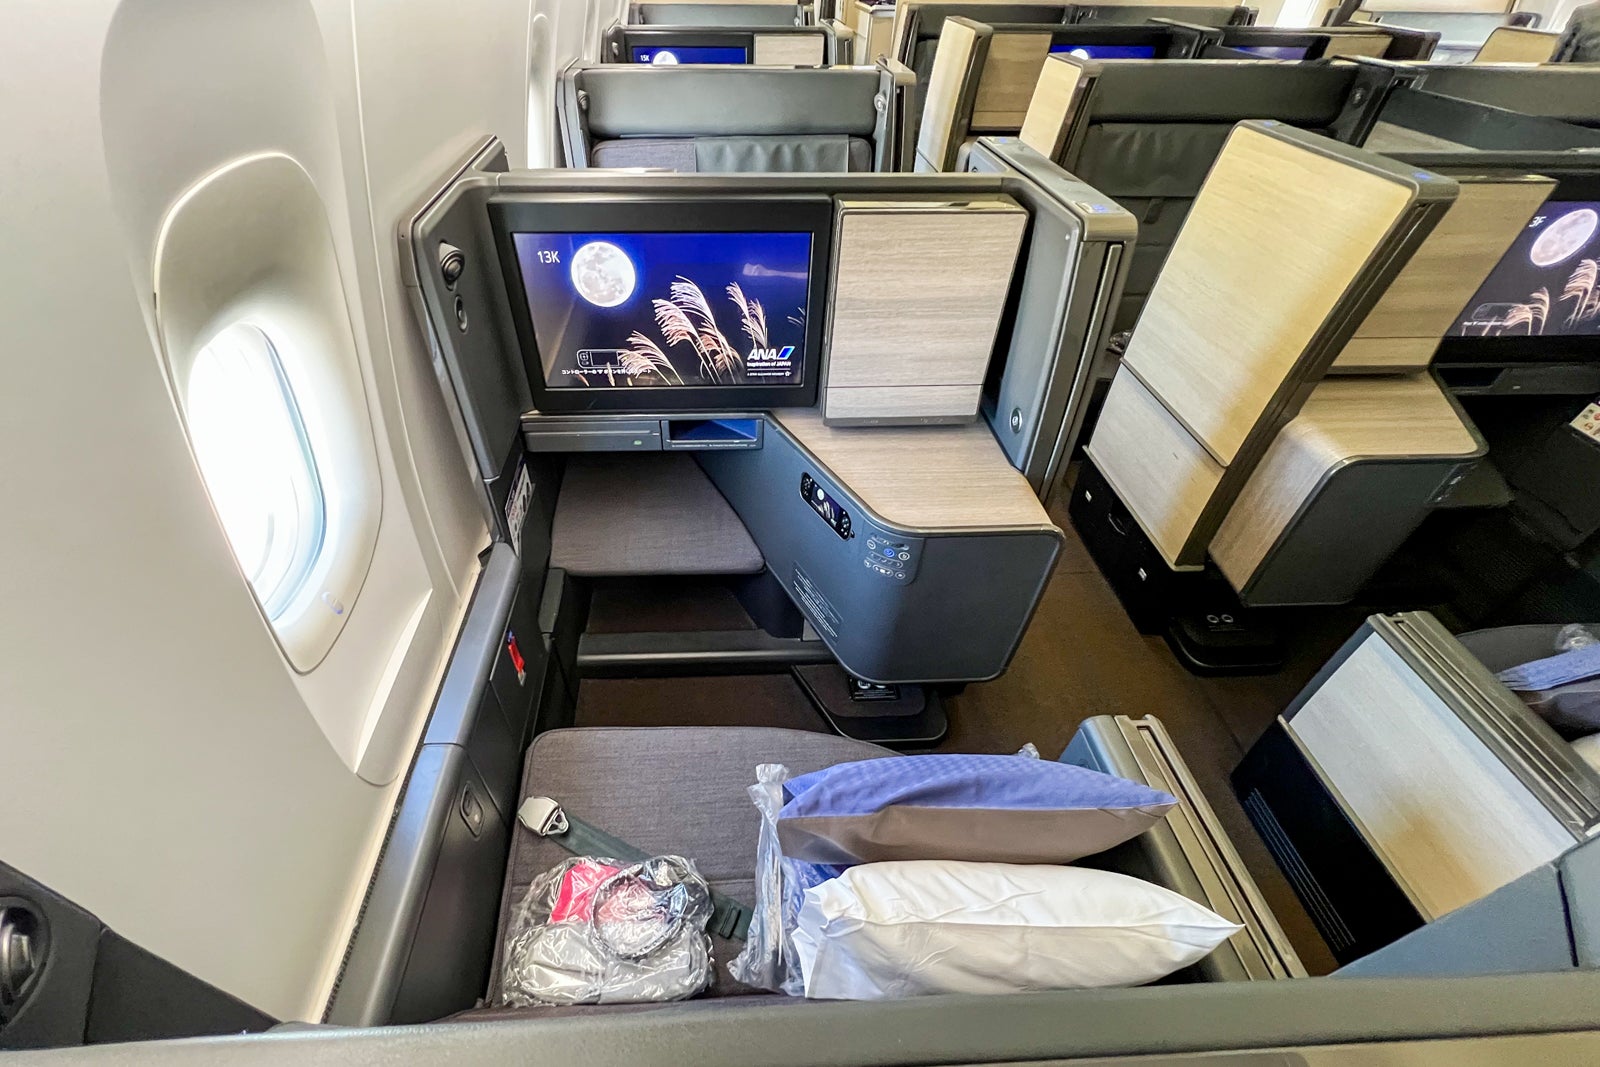 ANA's new business class on the Boeing 777-300ER